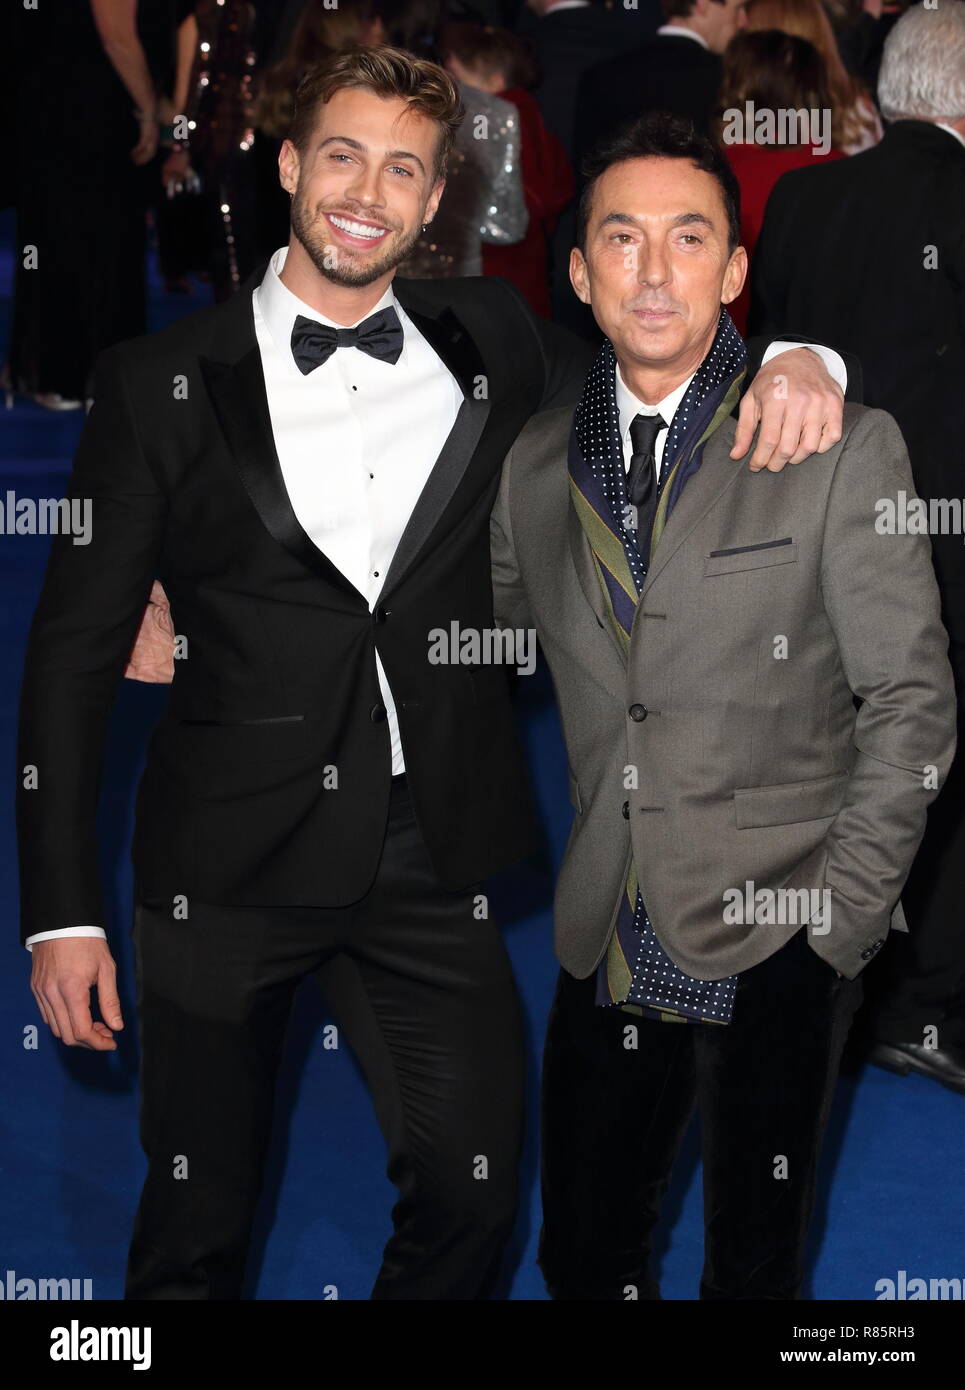 December 12, 2018 - London, United Kingdom - Matt Law and Bruno Tonioli are seen during the Mary Poppins Returns, UK Premiere at the Royal Albert Hall, Kensington in London. (Credit Image: © Keith Mayhew/SOPA Images via ZUMA Wire) Stock Photo